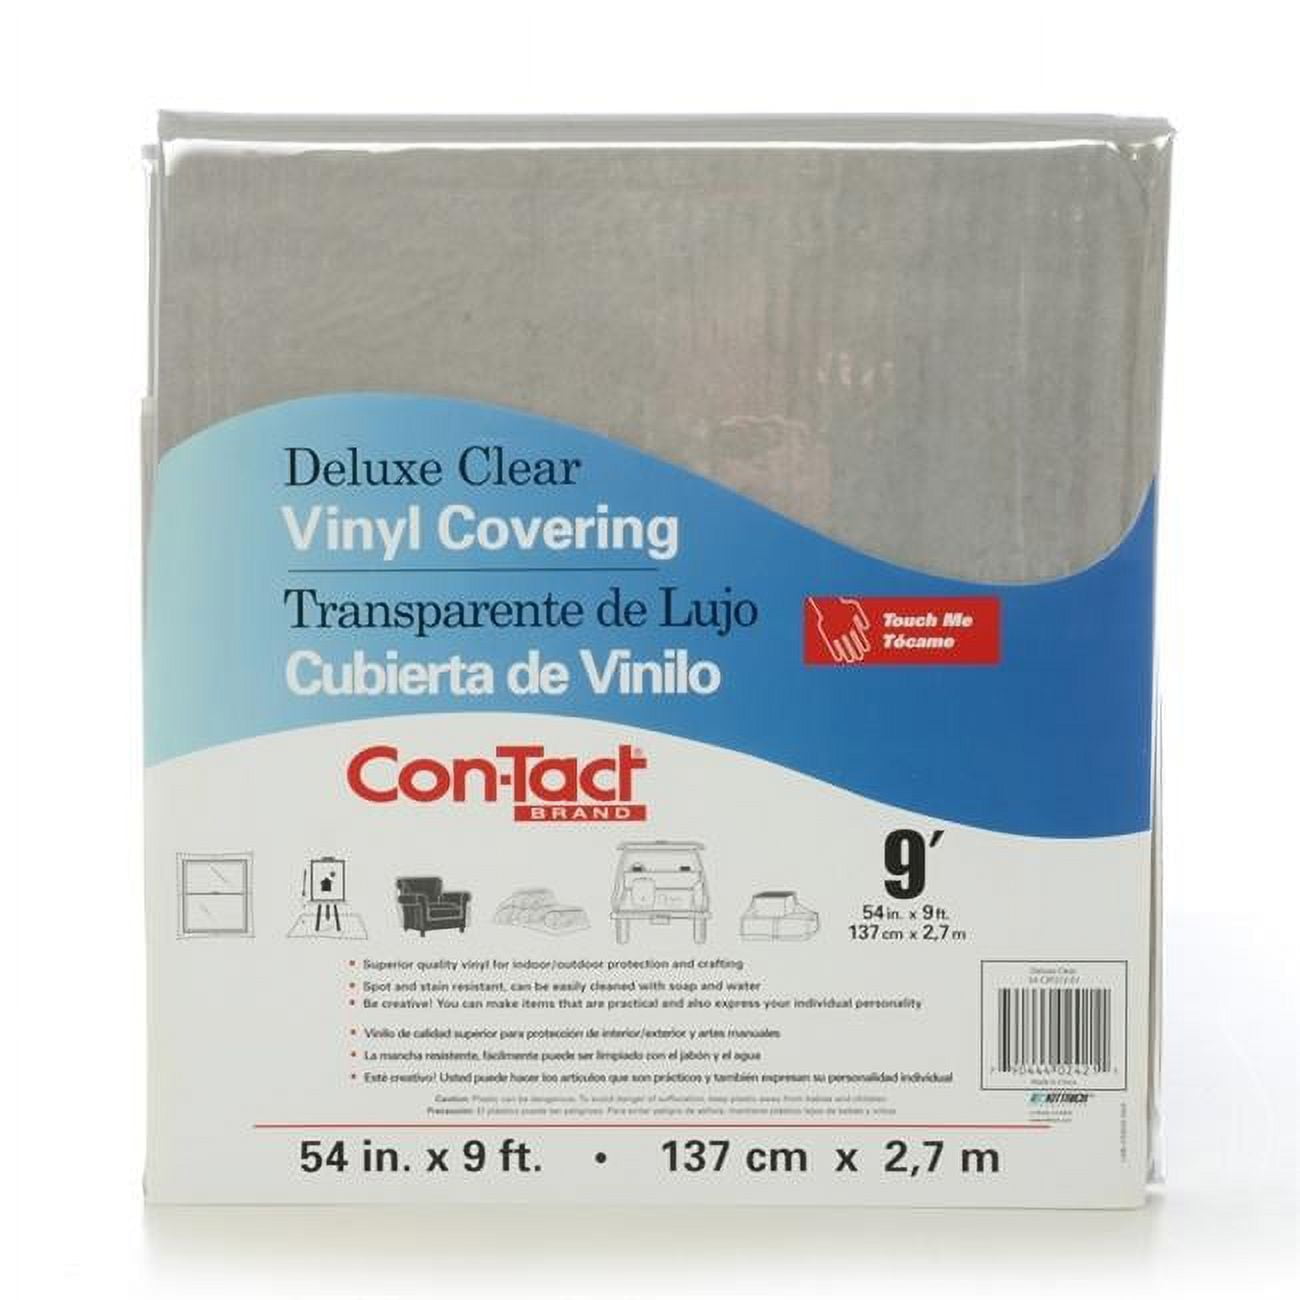 Con-Tact Clear Vinyl Covering, Deluxe, 54 x 9